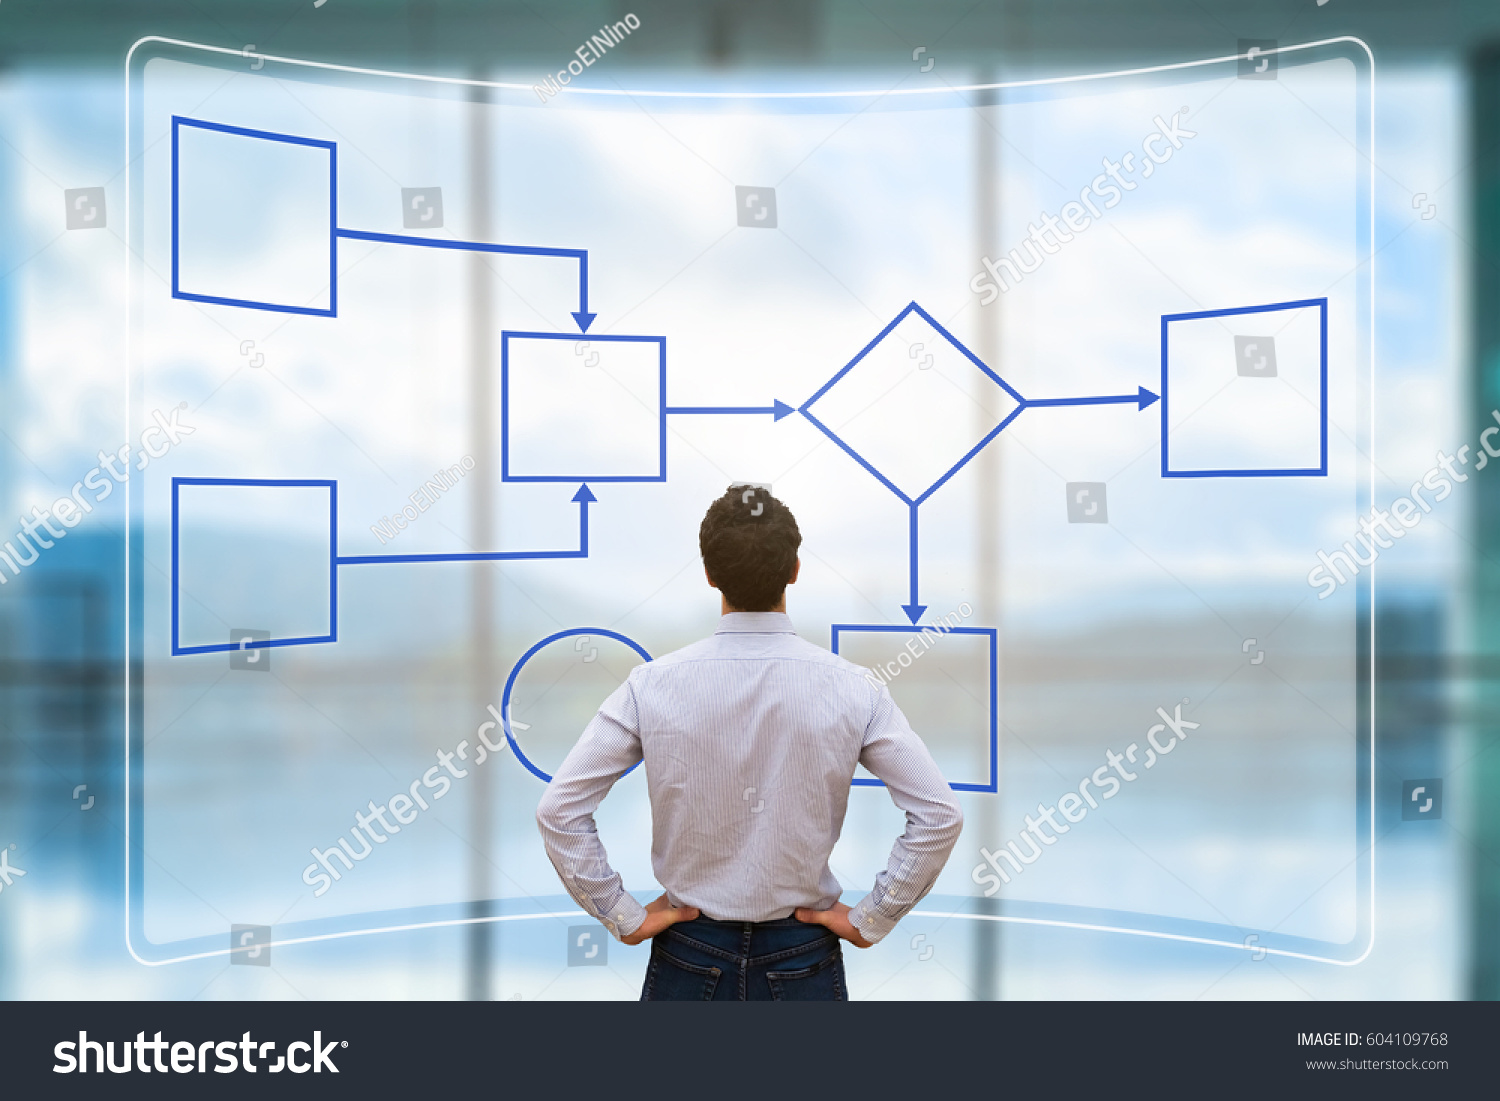 Business process management and automation concept with a workflow flowchart on a digital screen and a businessman #604109768